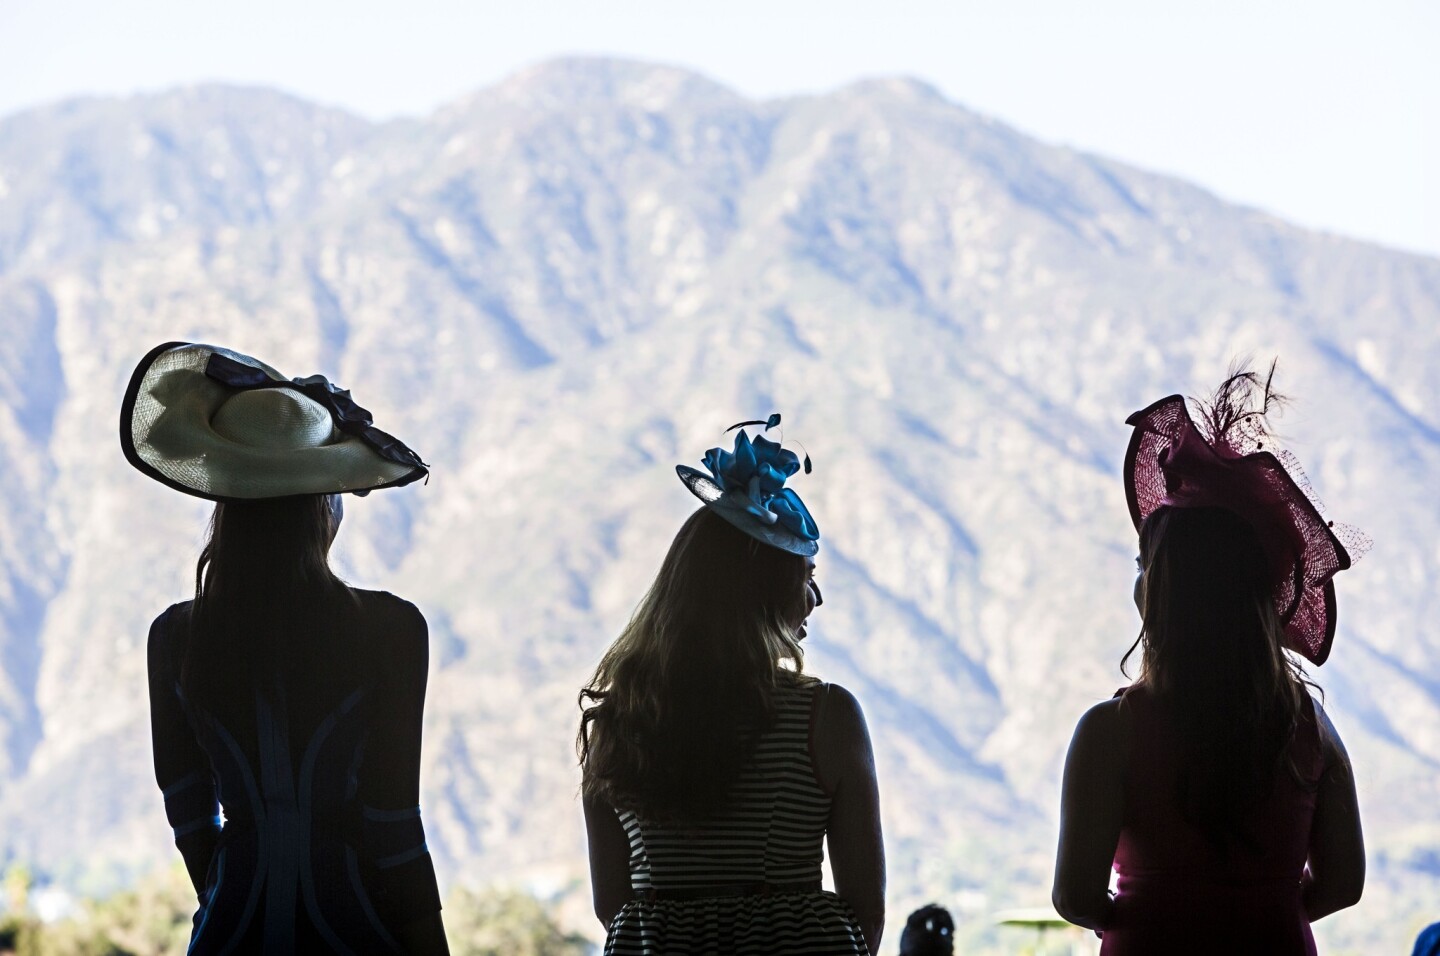 Models Jo Scott, Bailey Gallison, and Natalie Resendiz posing and wearing hats by Christine A. Moore Millinery at Santa Anita Park, against the backdrop of the San Gabriel Mountains.